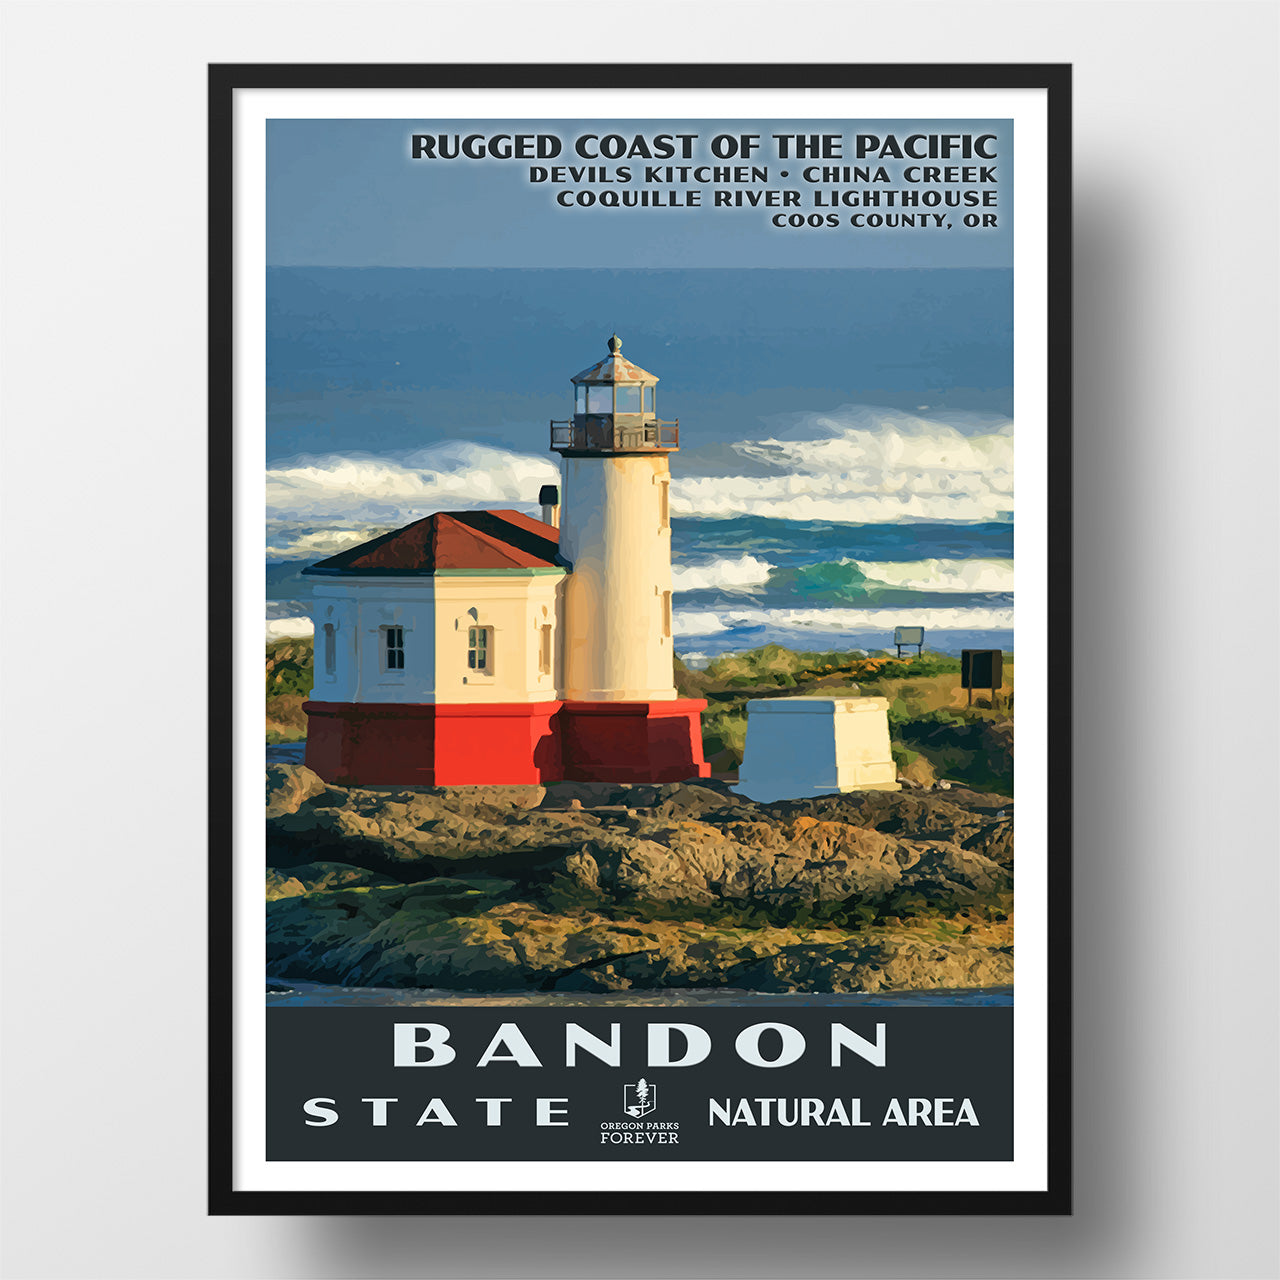 Bandon State Natural Area Poster - WPA (Coquille River Lighthouse) - OPF